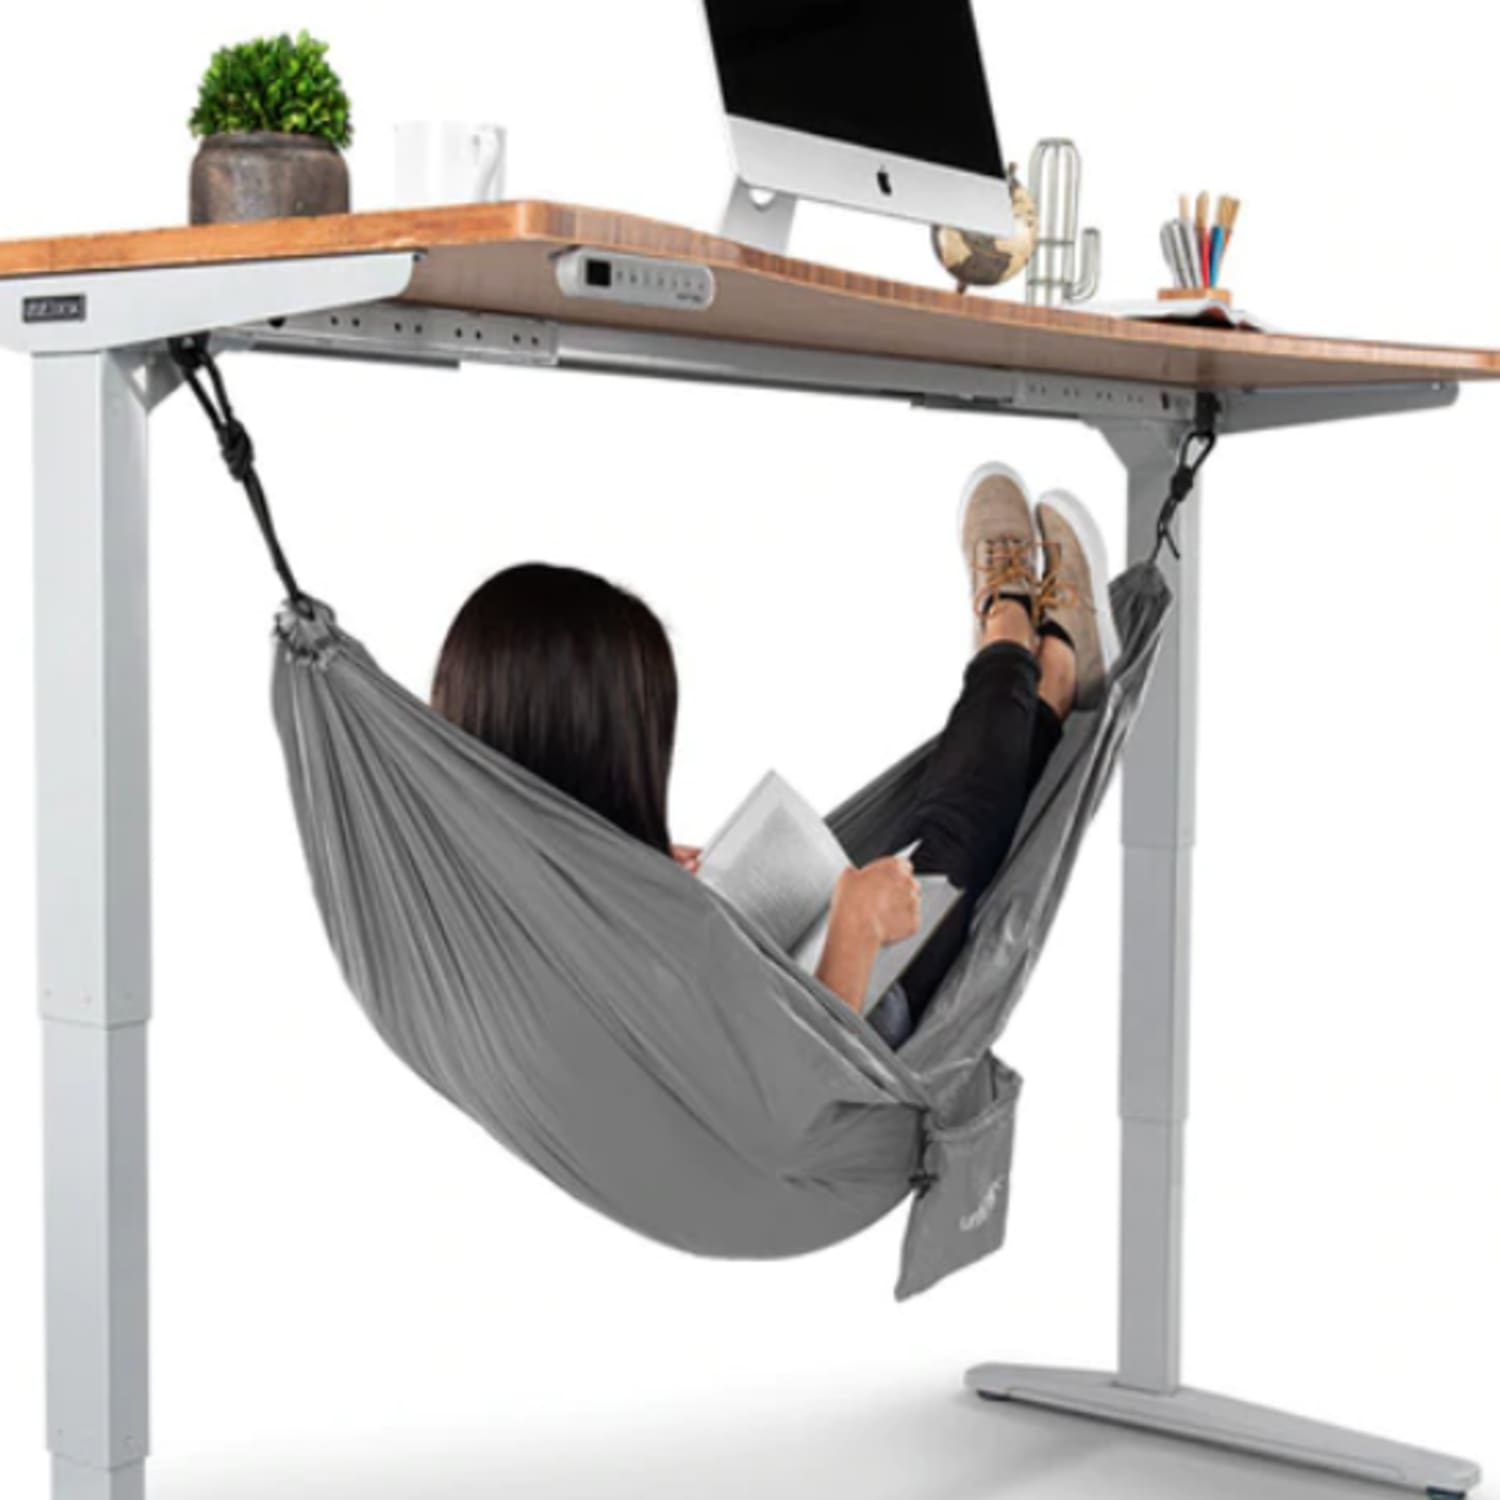 Squeeze in a Quick Nap at Work with This Under-Desk Hammock